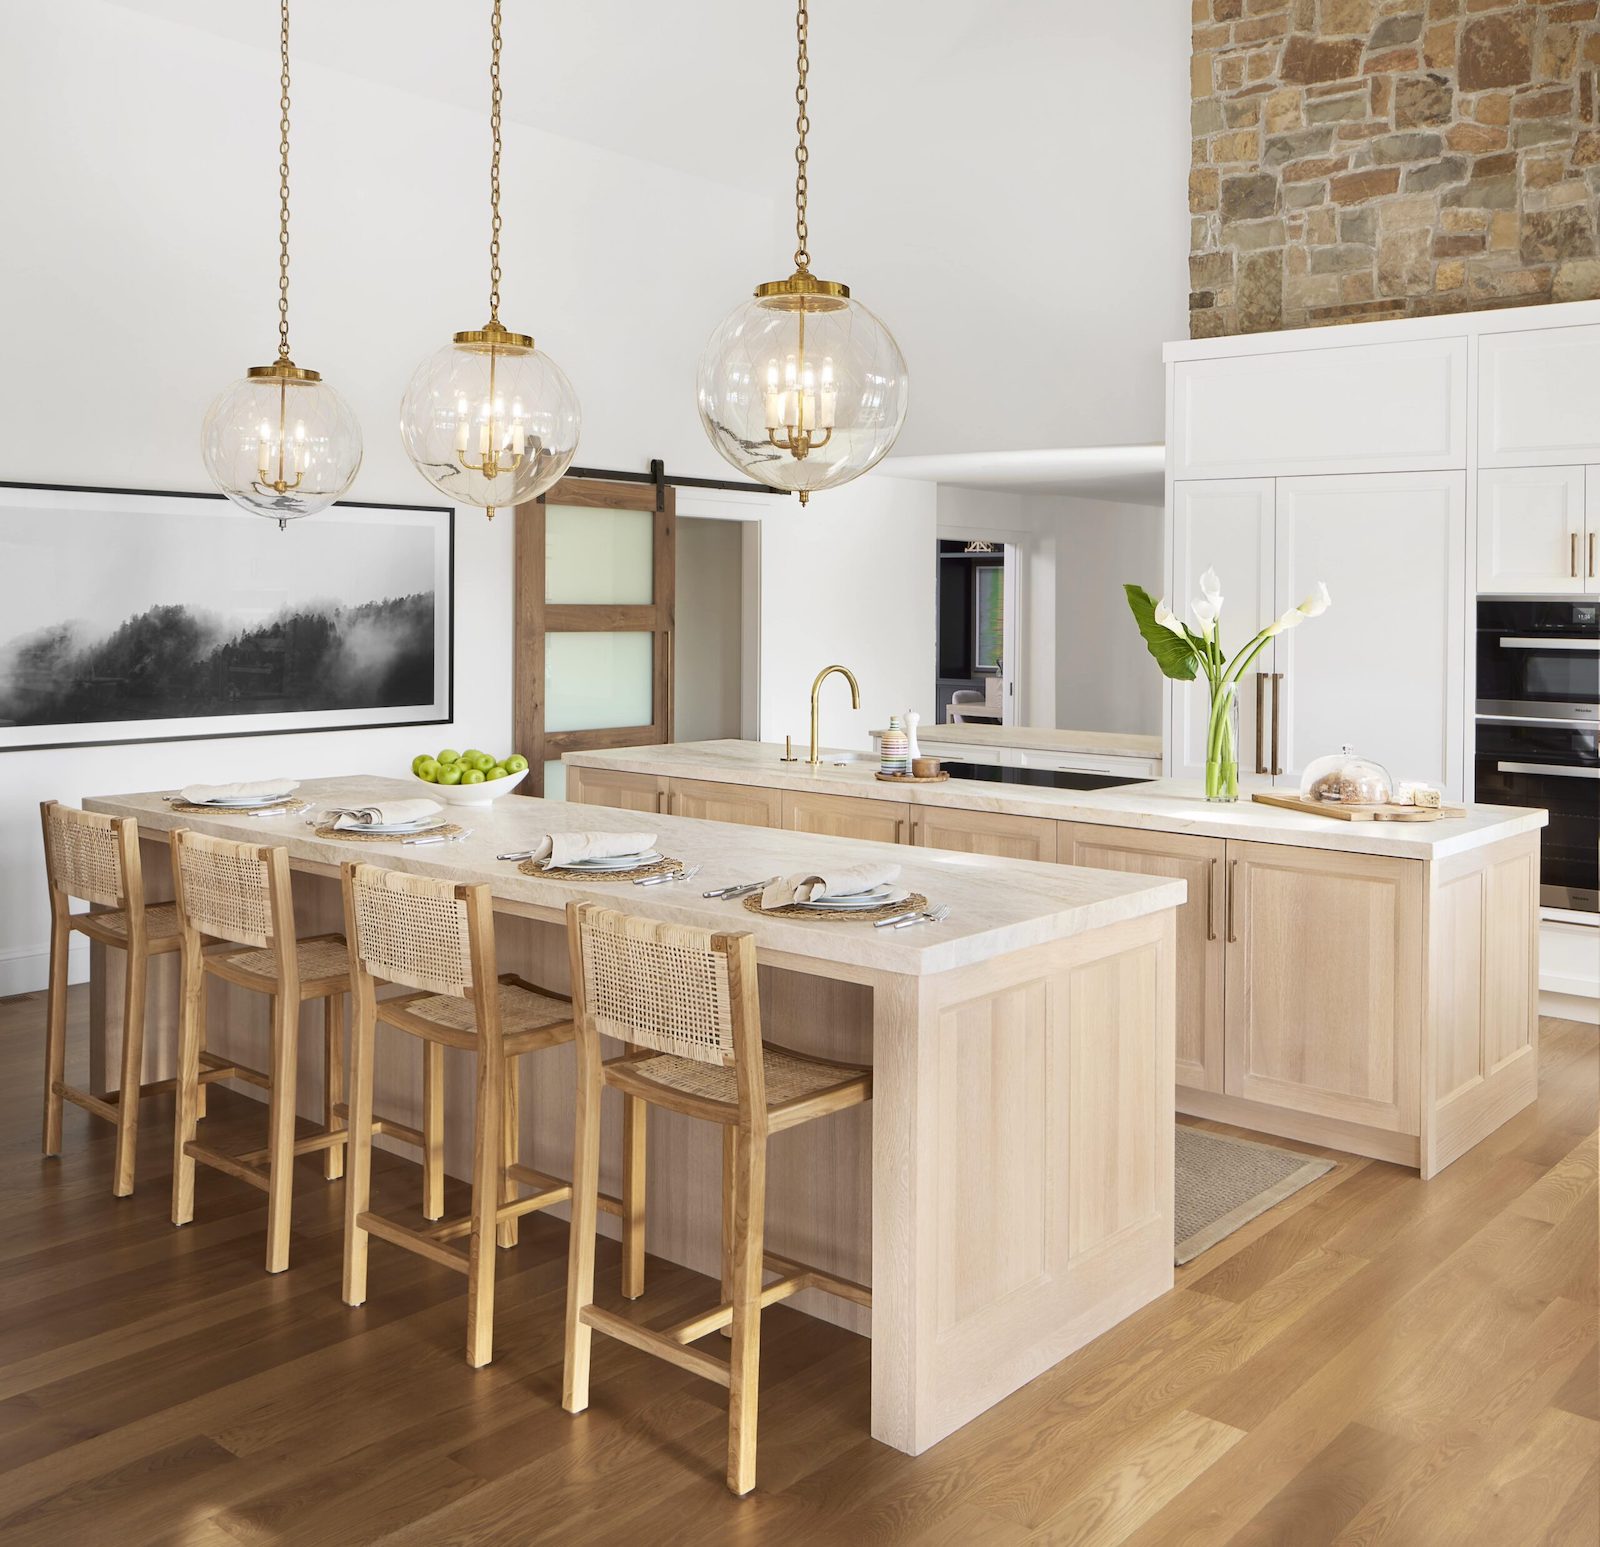 open kitchen concept with islands